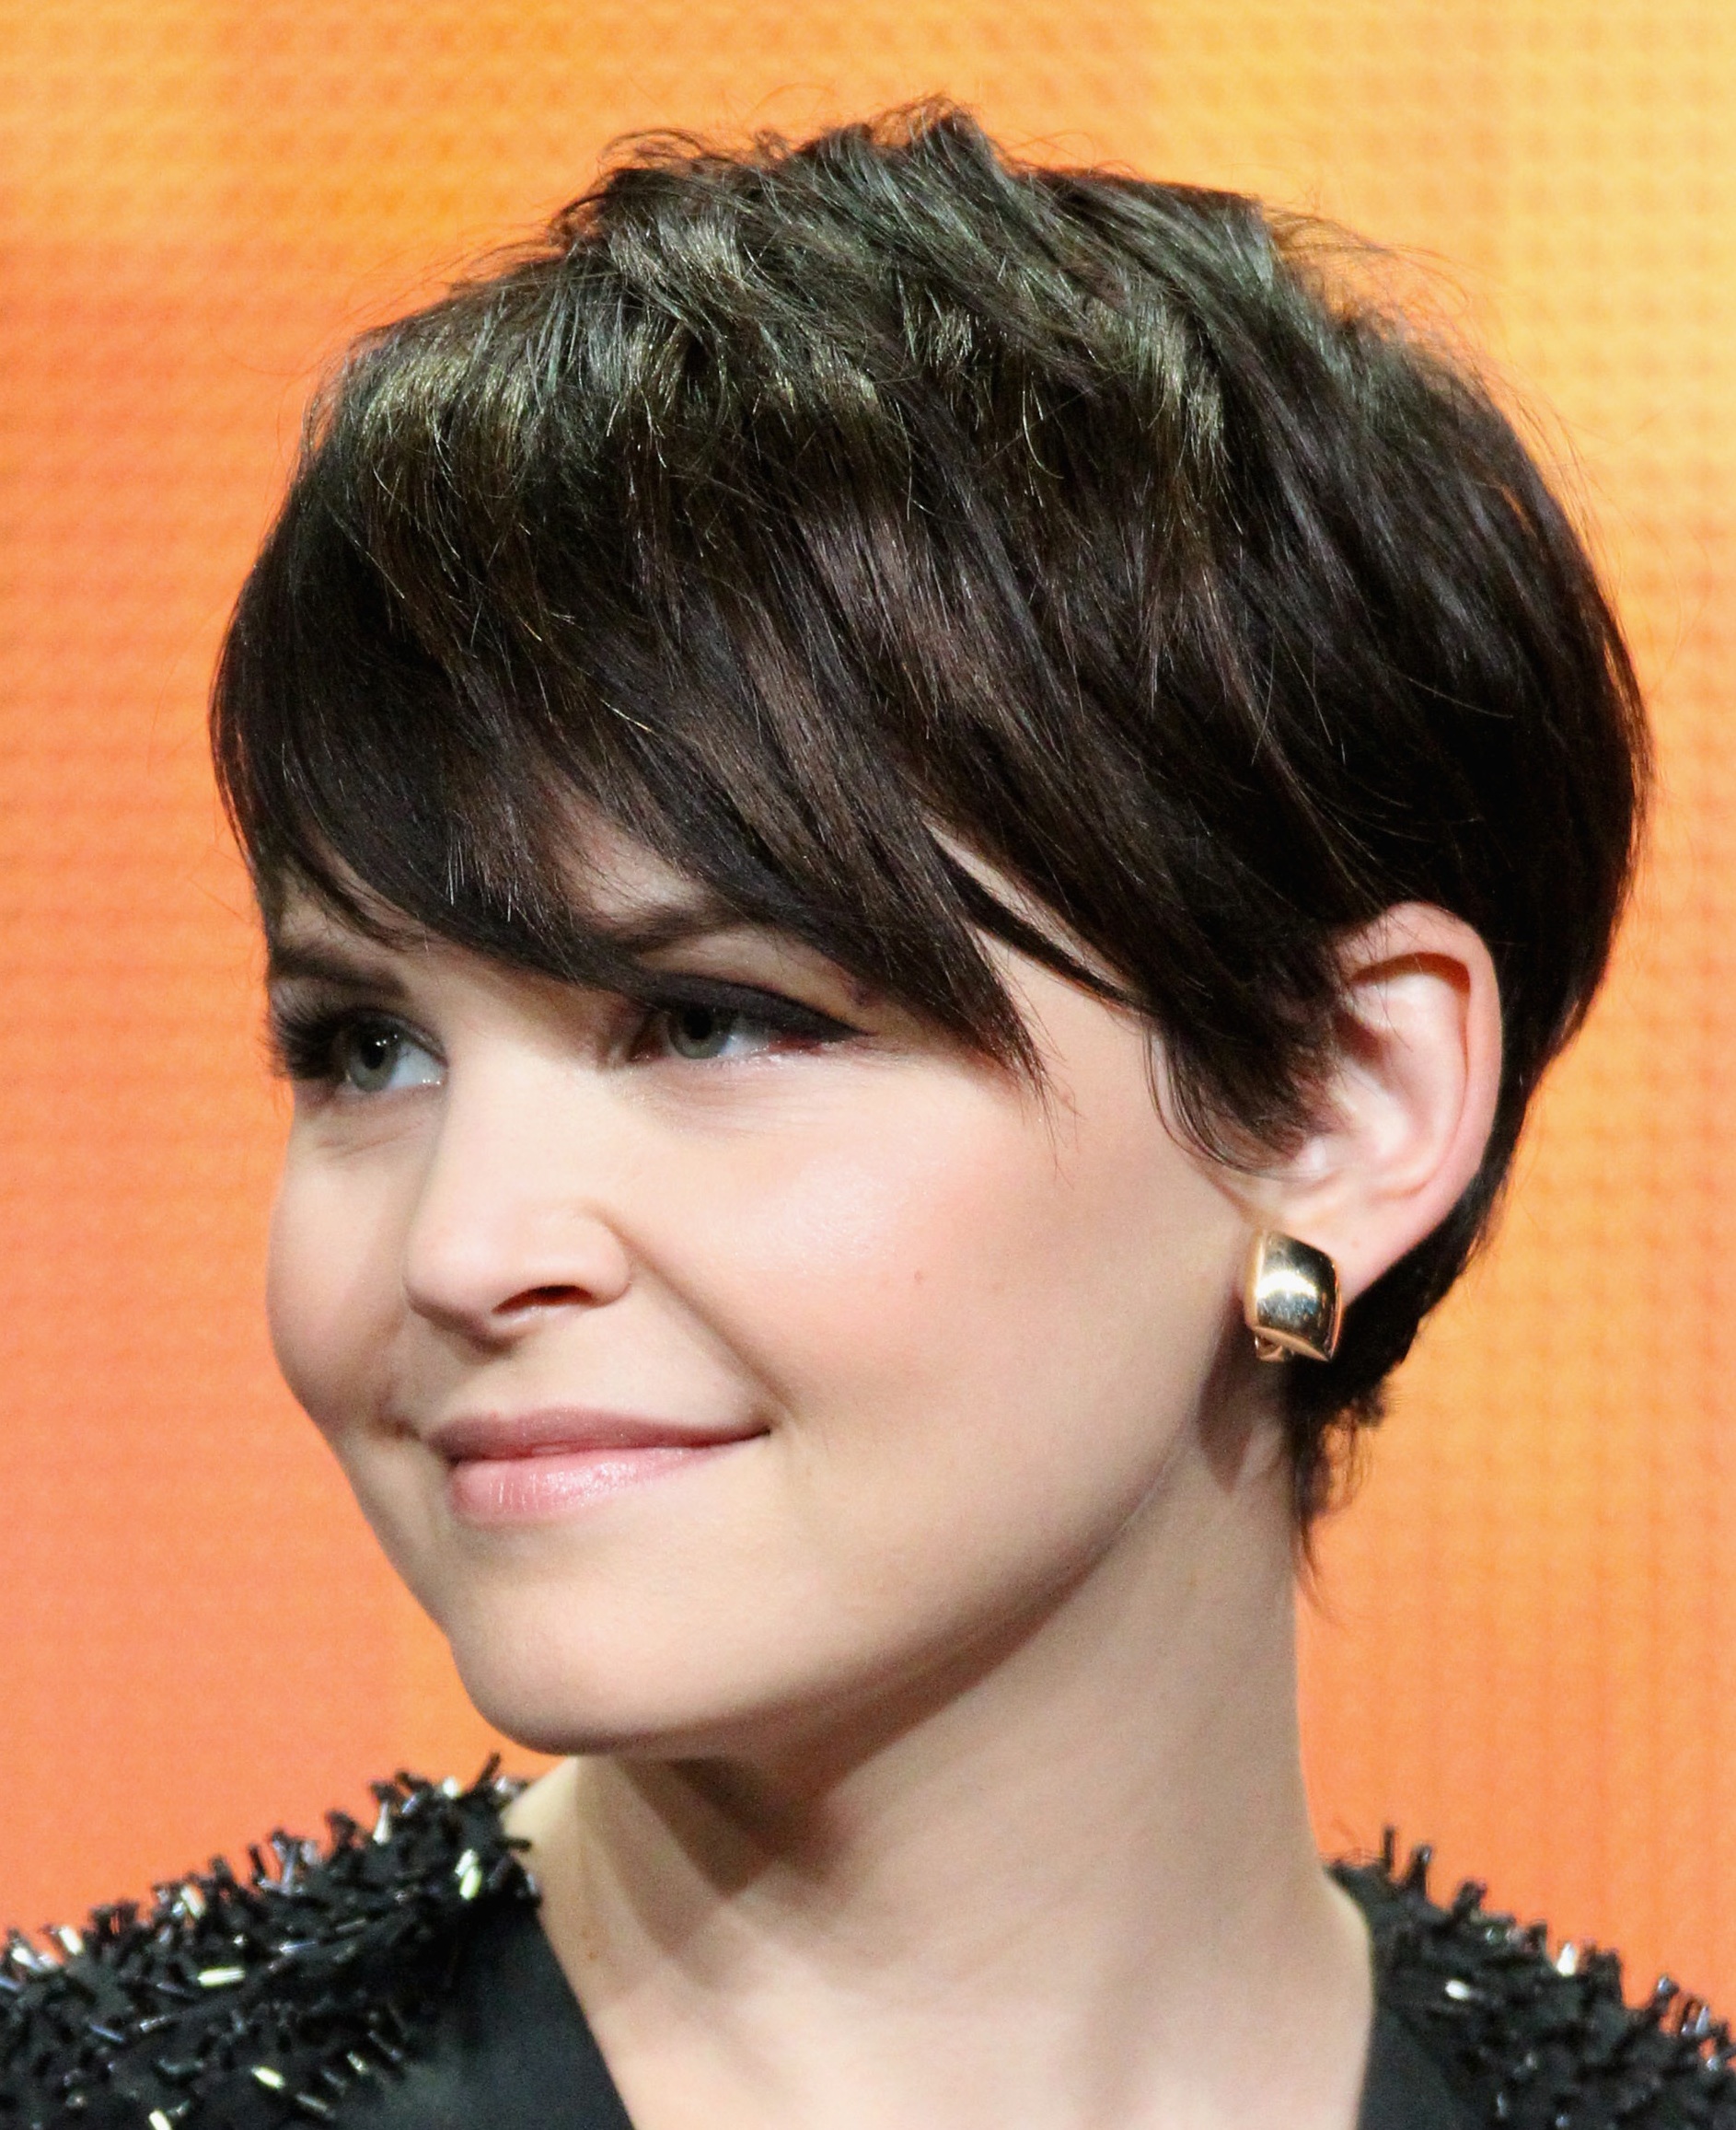 BEVERLY HILLS, CA - AUGUST 07: Actress Ginnifer Goodwin of the television show "Once Upon A Time" speaks during the Disney ABC Television Group portion of the 2011 Summer Television Critics Association Press Tour held at The Beverly Hilton Hotel on August 7, 2011 in Beverly Hills, California. (Photo by Frederick M. Brown/Getty Images)